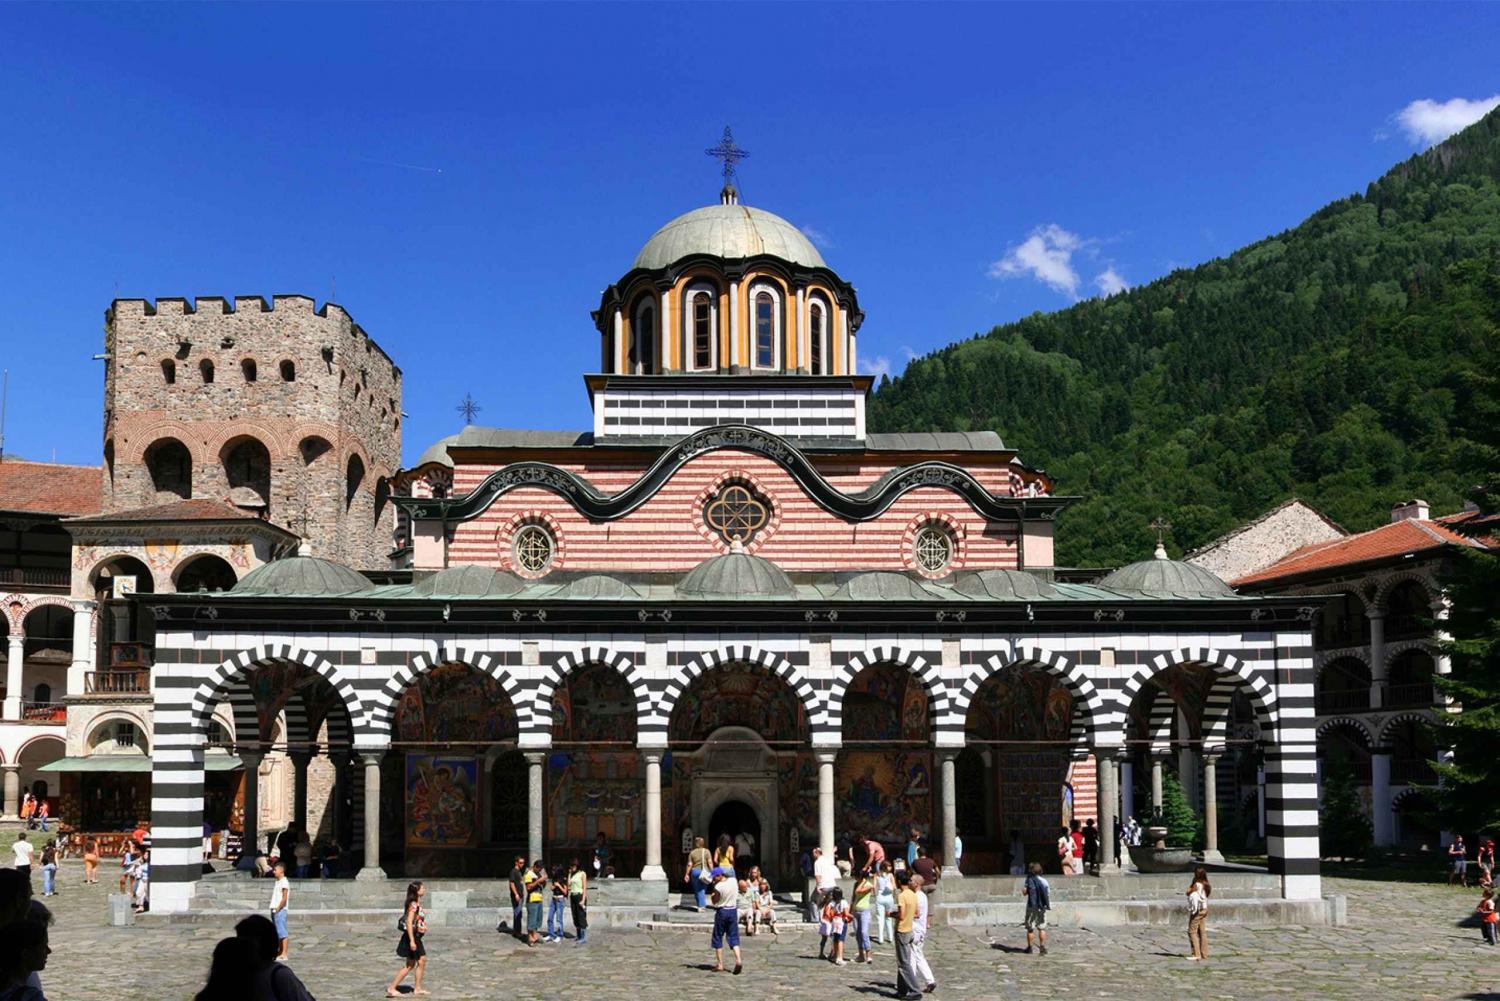 From Sofia: Afternoon Self-Guided Trip to Rila Monastery